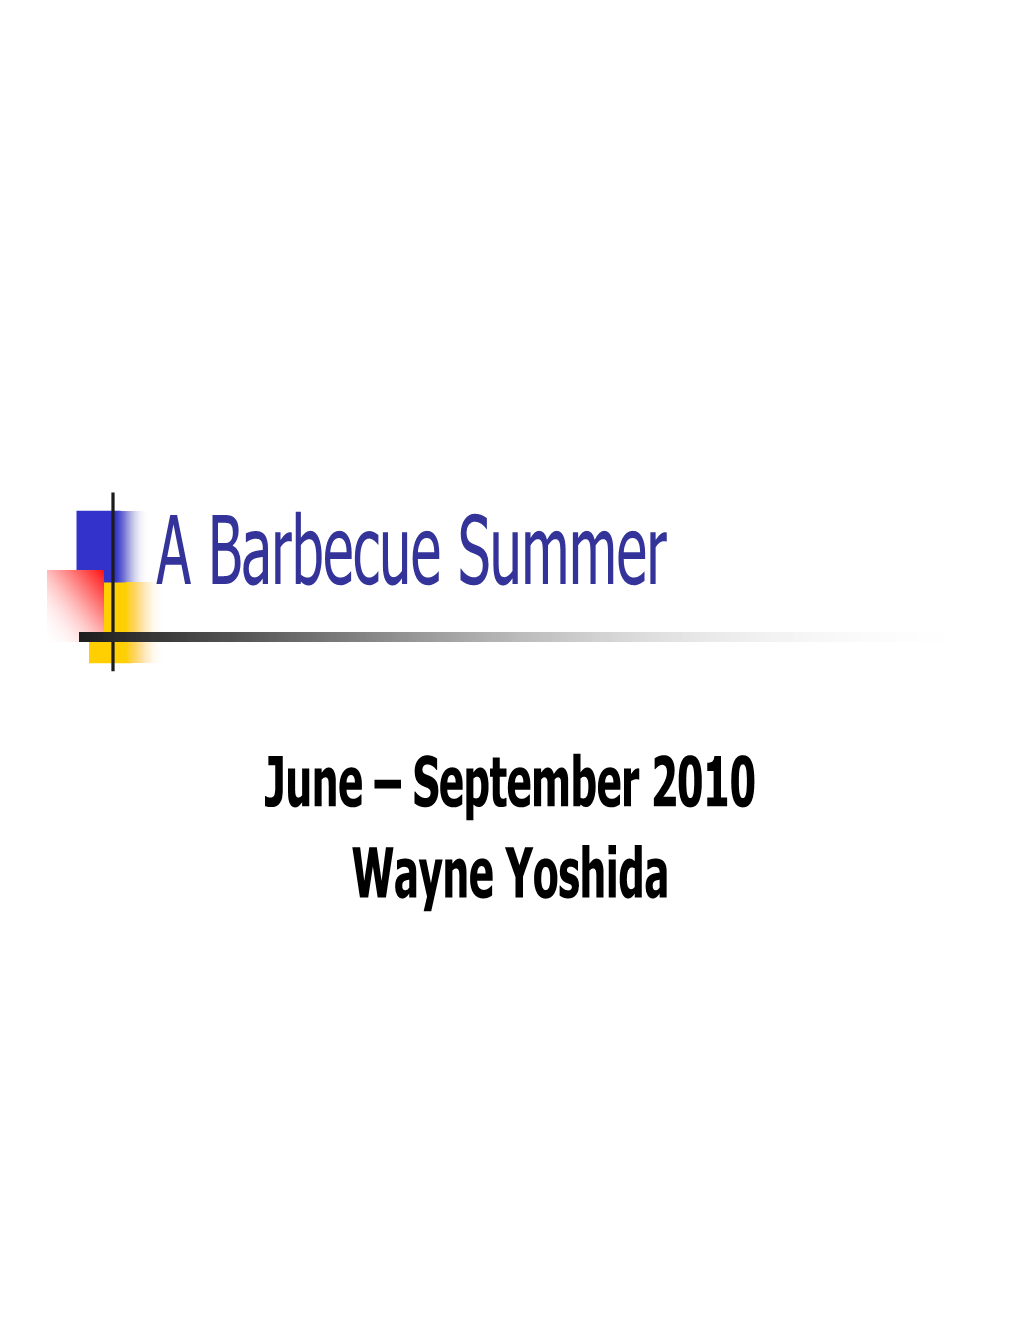 A Barbecue Summer